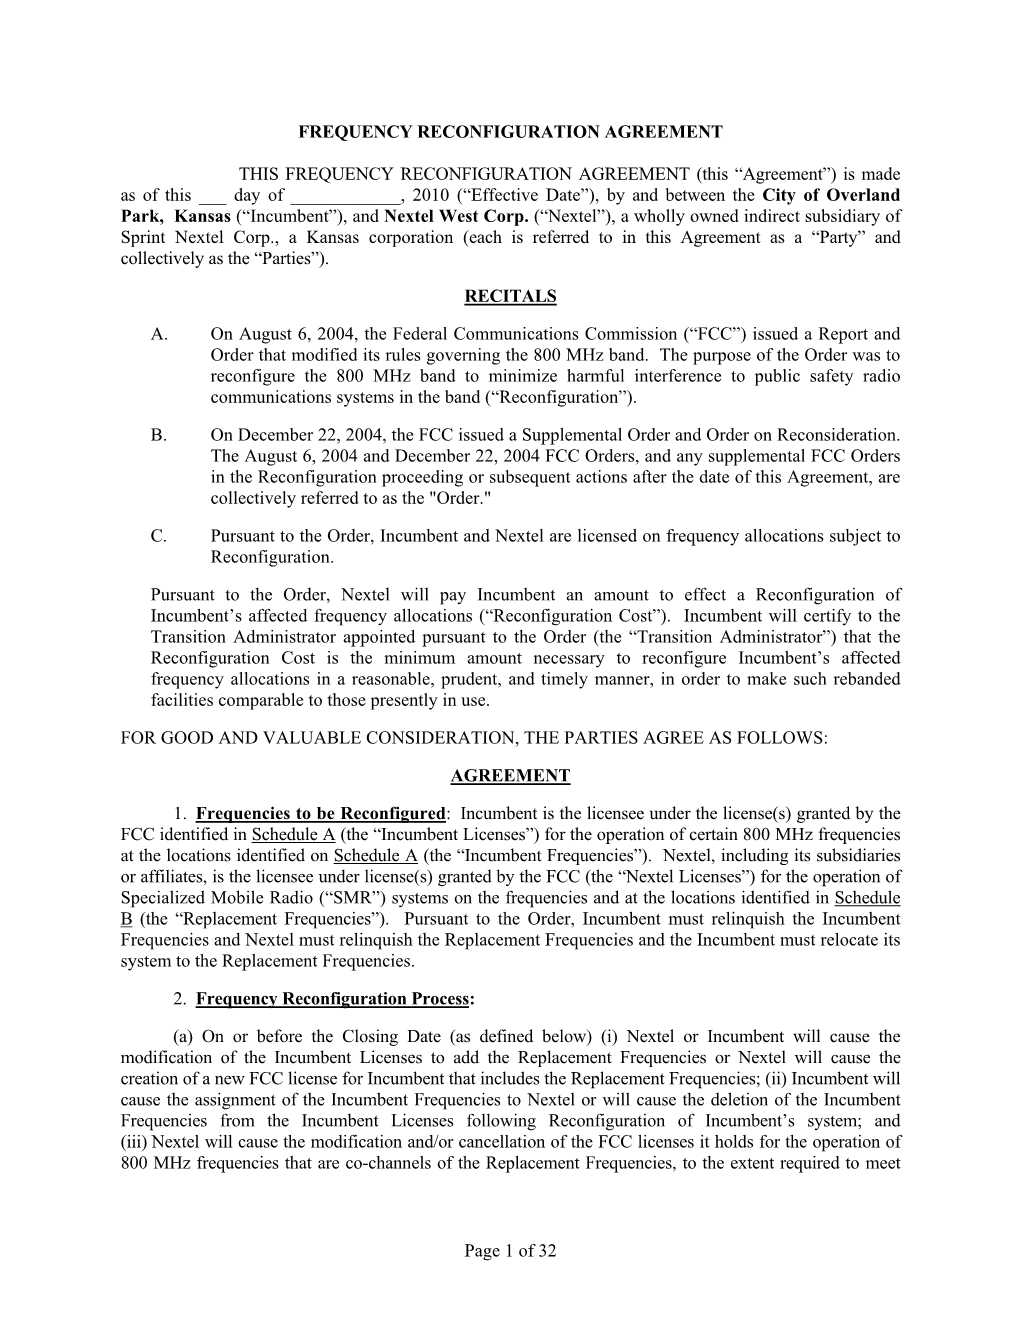 This “Agreement”) Is Made As of This ___ Day of ______, 2010 (“Effective Date”), by and Between the City of Overland Park, Kansas (“Incumbent”), and Nextel West Corp